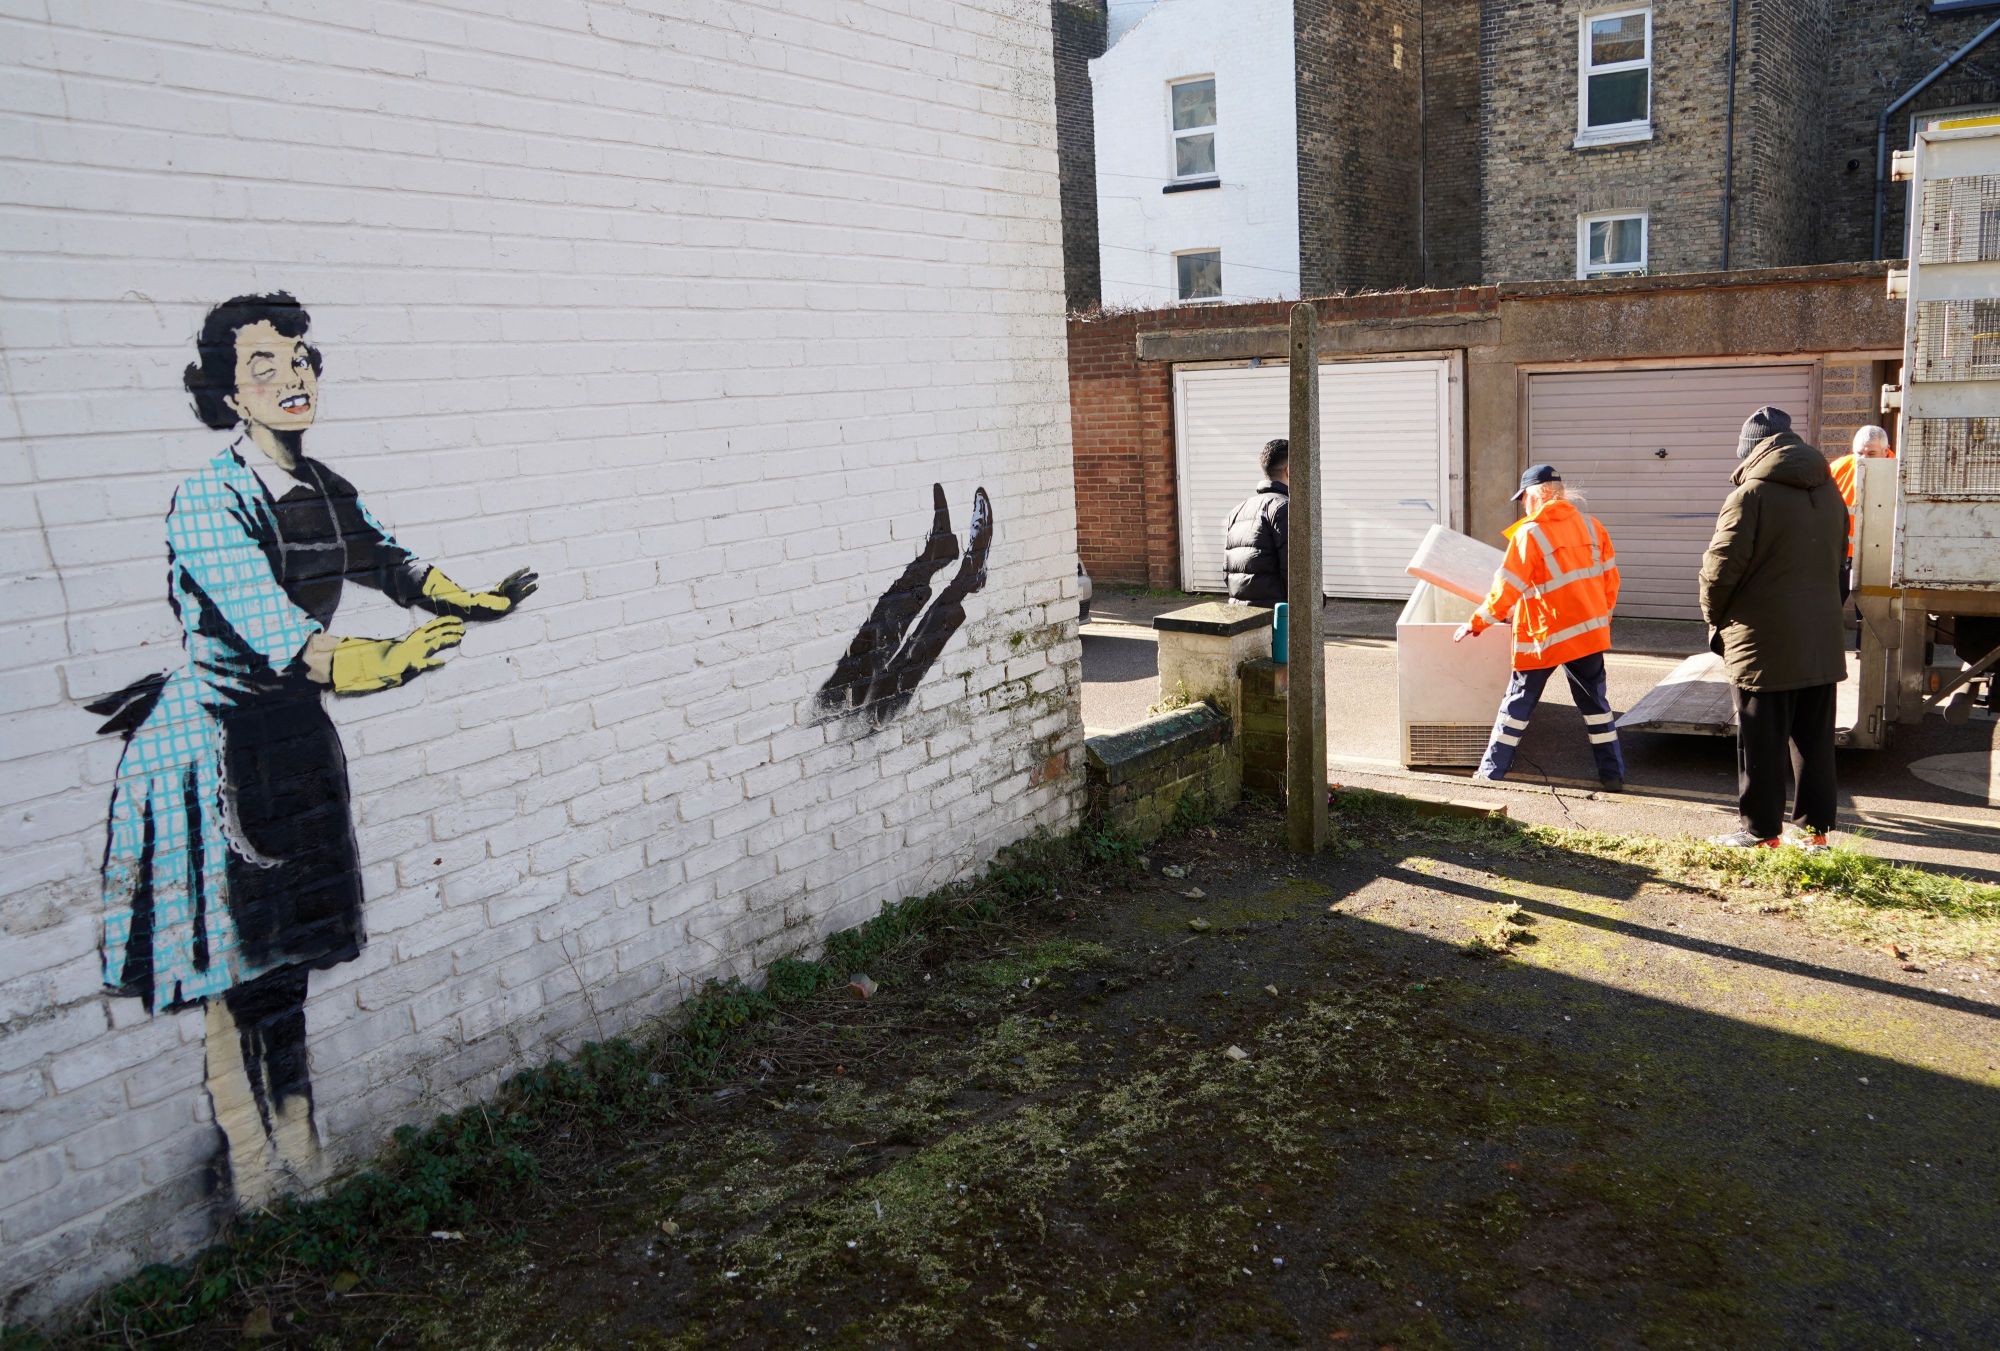 Workers remove a chest freezer that had formed part of an artwork, acknowledged as the work of street artist Banksy, from the side of a house in Margate, in southeast England on February 14, 2023. - The artwork appears to show a 1950s housewife with a swollen eye, missing a tooth, and apparently shutting a man in a freezer. The freezer was later removed by council workers. - RESTRICTED TO EDITORIAL USE - MANDATORY MENTION OF THE ARTIST UPON PUBLICATION - TO ILLUSTRATE THE EVENT AS SPECIFIED IN THE CAPTION (Photo by William EDWARDS / AFP) / RESTRICTED TO EDITORIAL USE - MANDATORY MENTION OF THE ARTIST UPON PUBLICATION - TO ILLUSTRATE THE EVENT AS SPECIFIED IN THE CAPTION / RESTRICTED TO EDITORIAL USE - MANDATORY MENTION OF THE ARTIST UPON PUBLICATION - TO ILLUSTRATE THE EVENT AS SPECIFIED IN THE CAPTION (Photo WILLIAM EDWARDS/AFP via Getty Images)